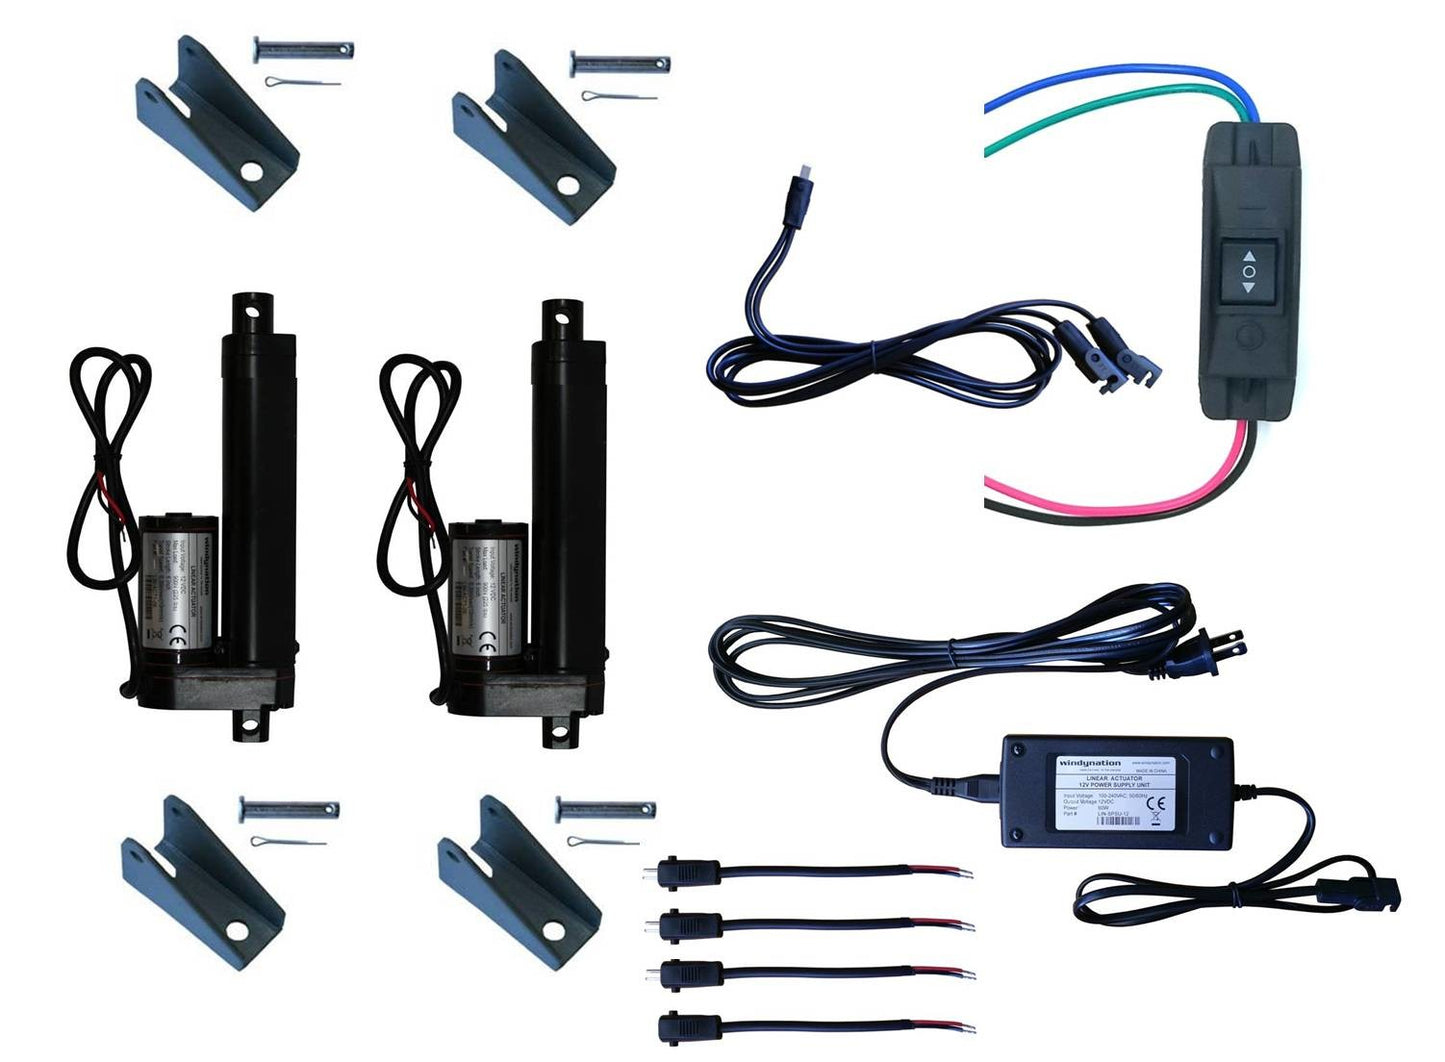 Linear Actuator 12-Volt 225lbs with Power Supply and Mounting Brackets + Up Down DPDT Switch